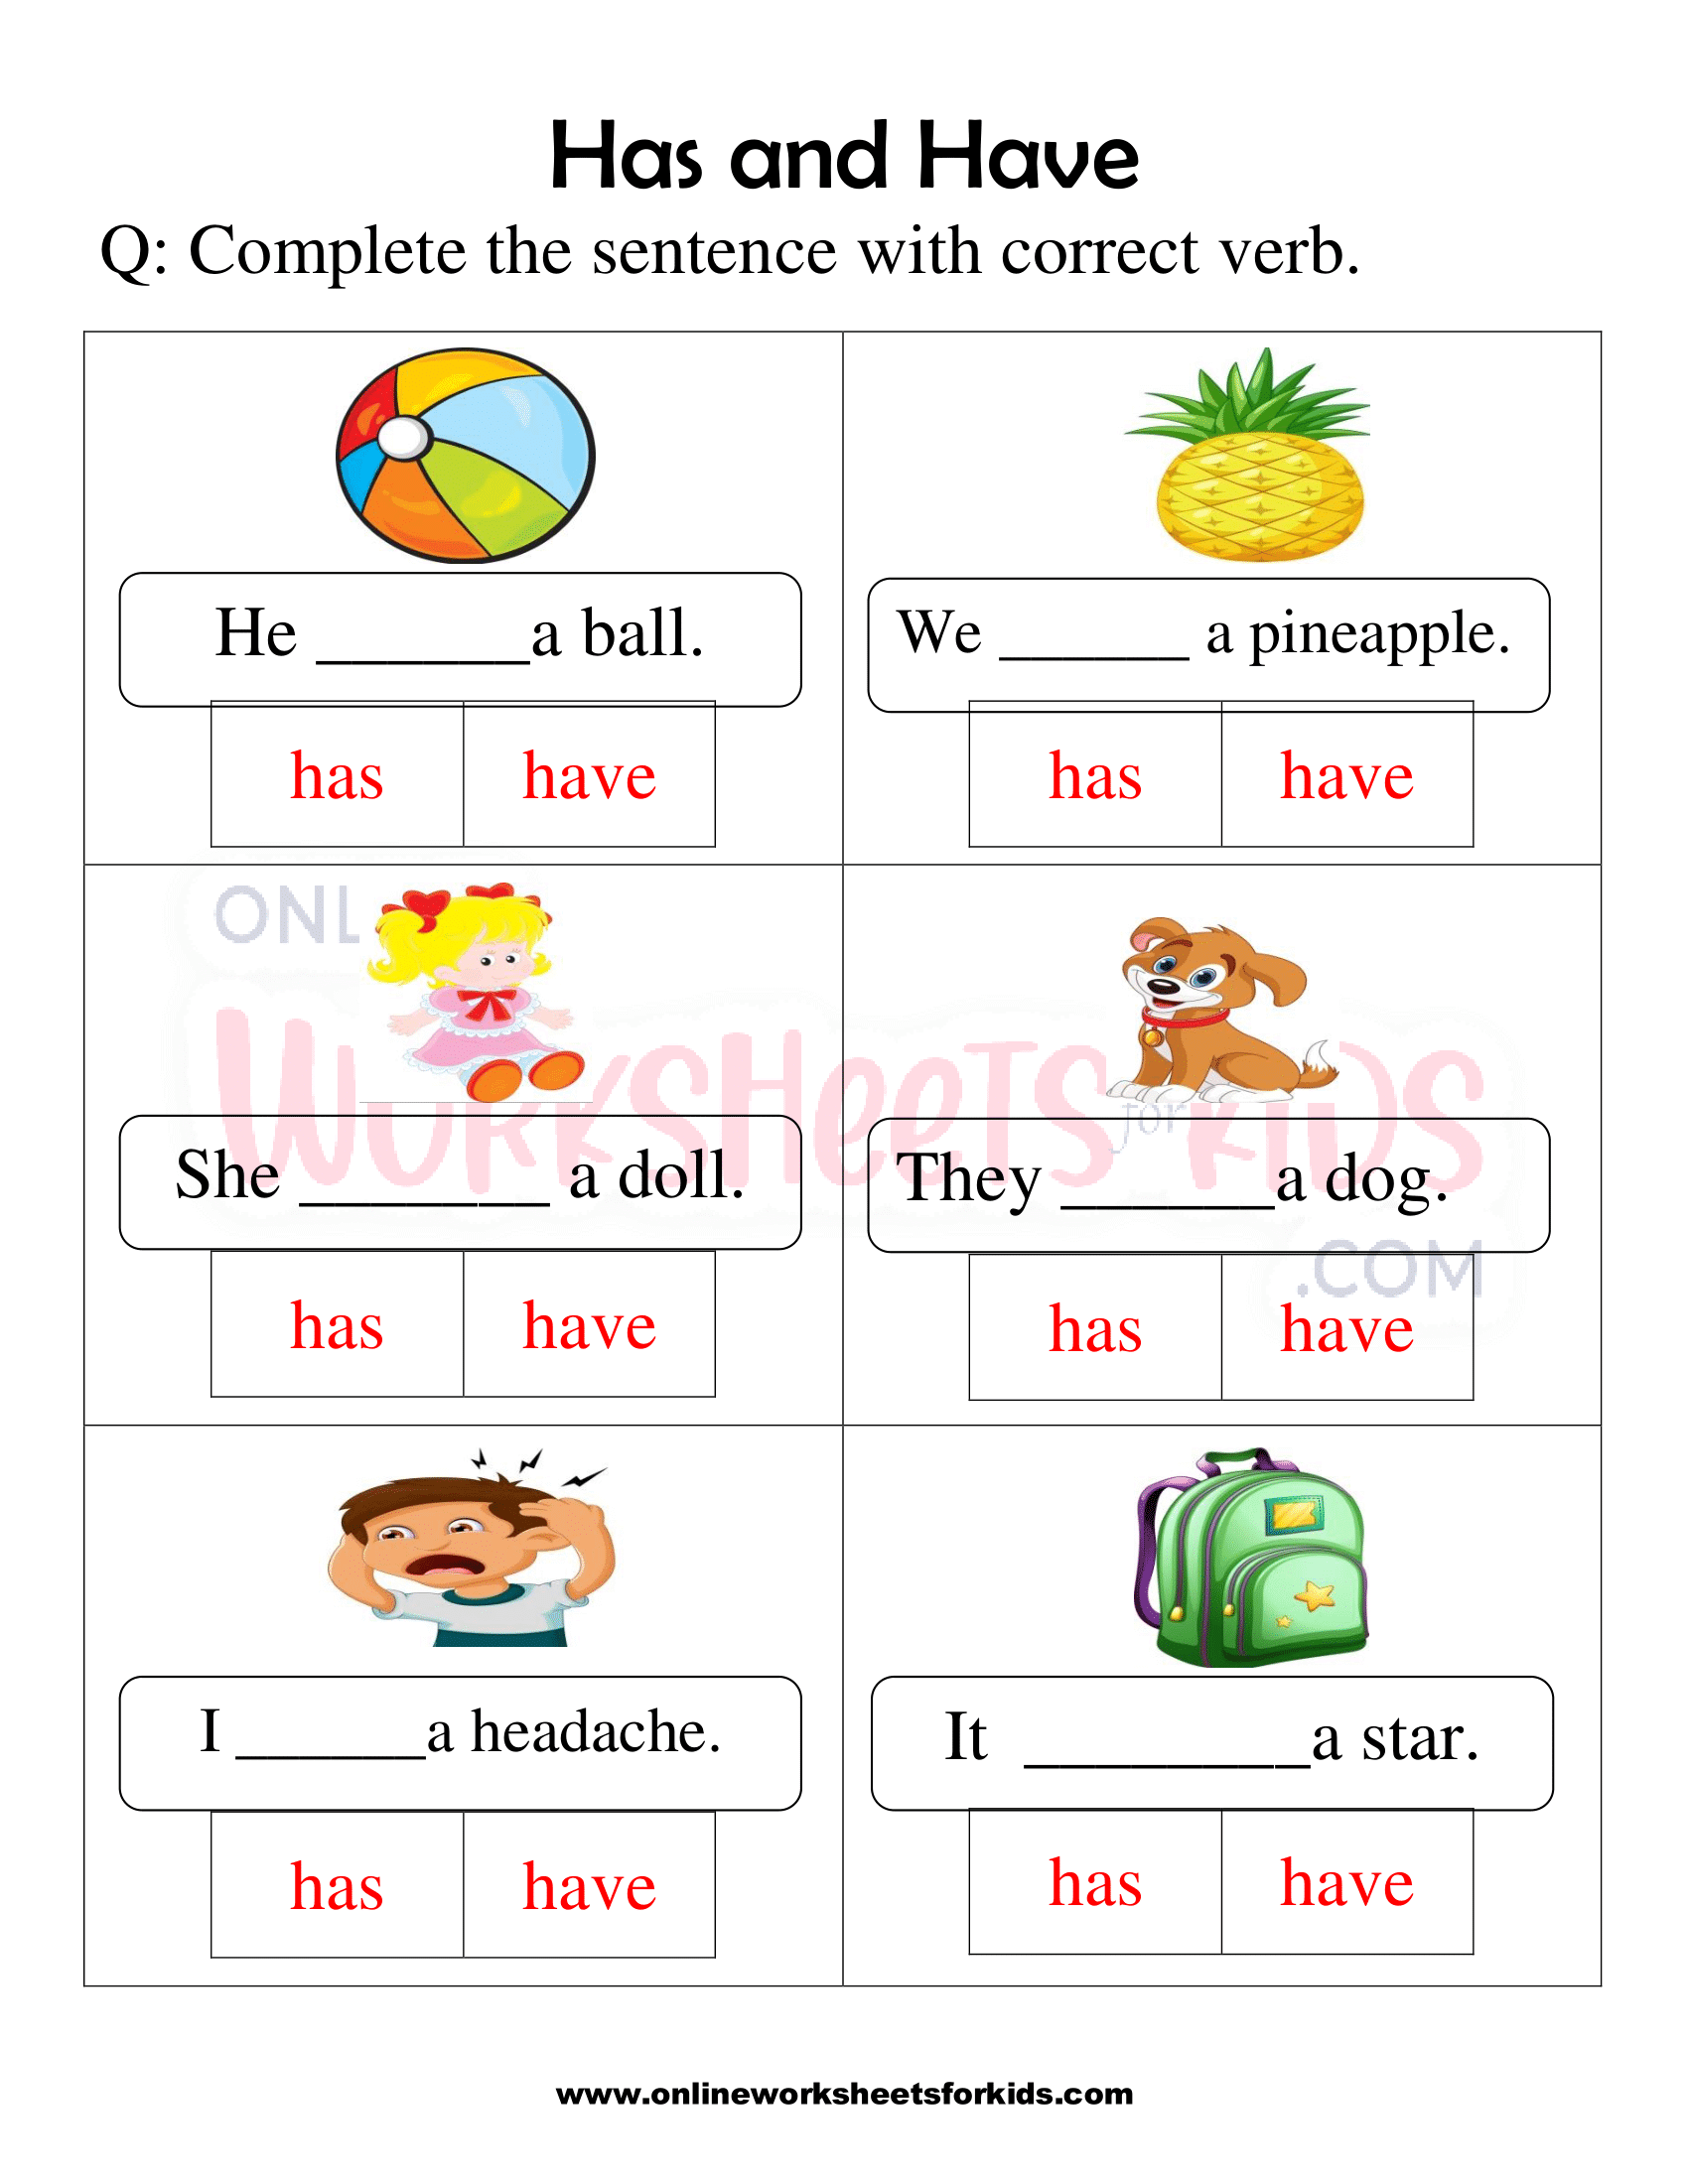 has-and-have-worksheets-for-grade-1-10